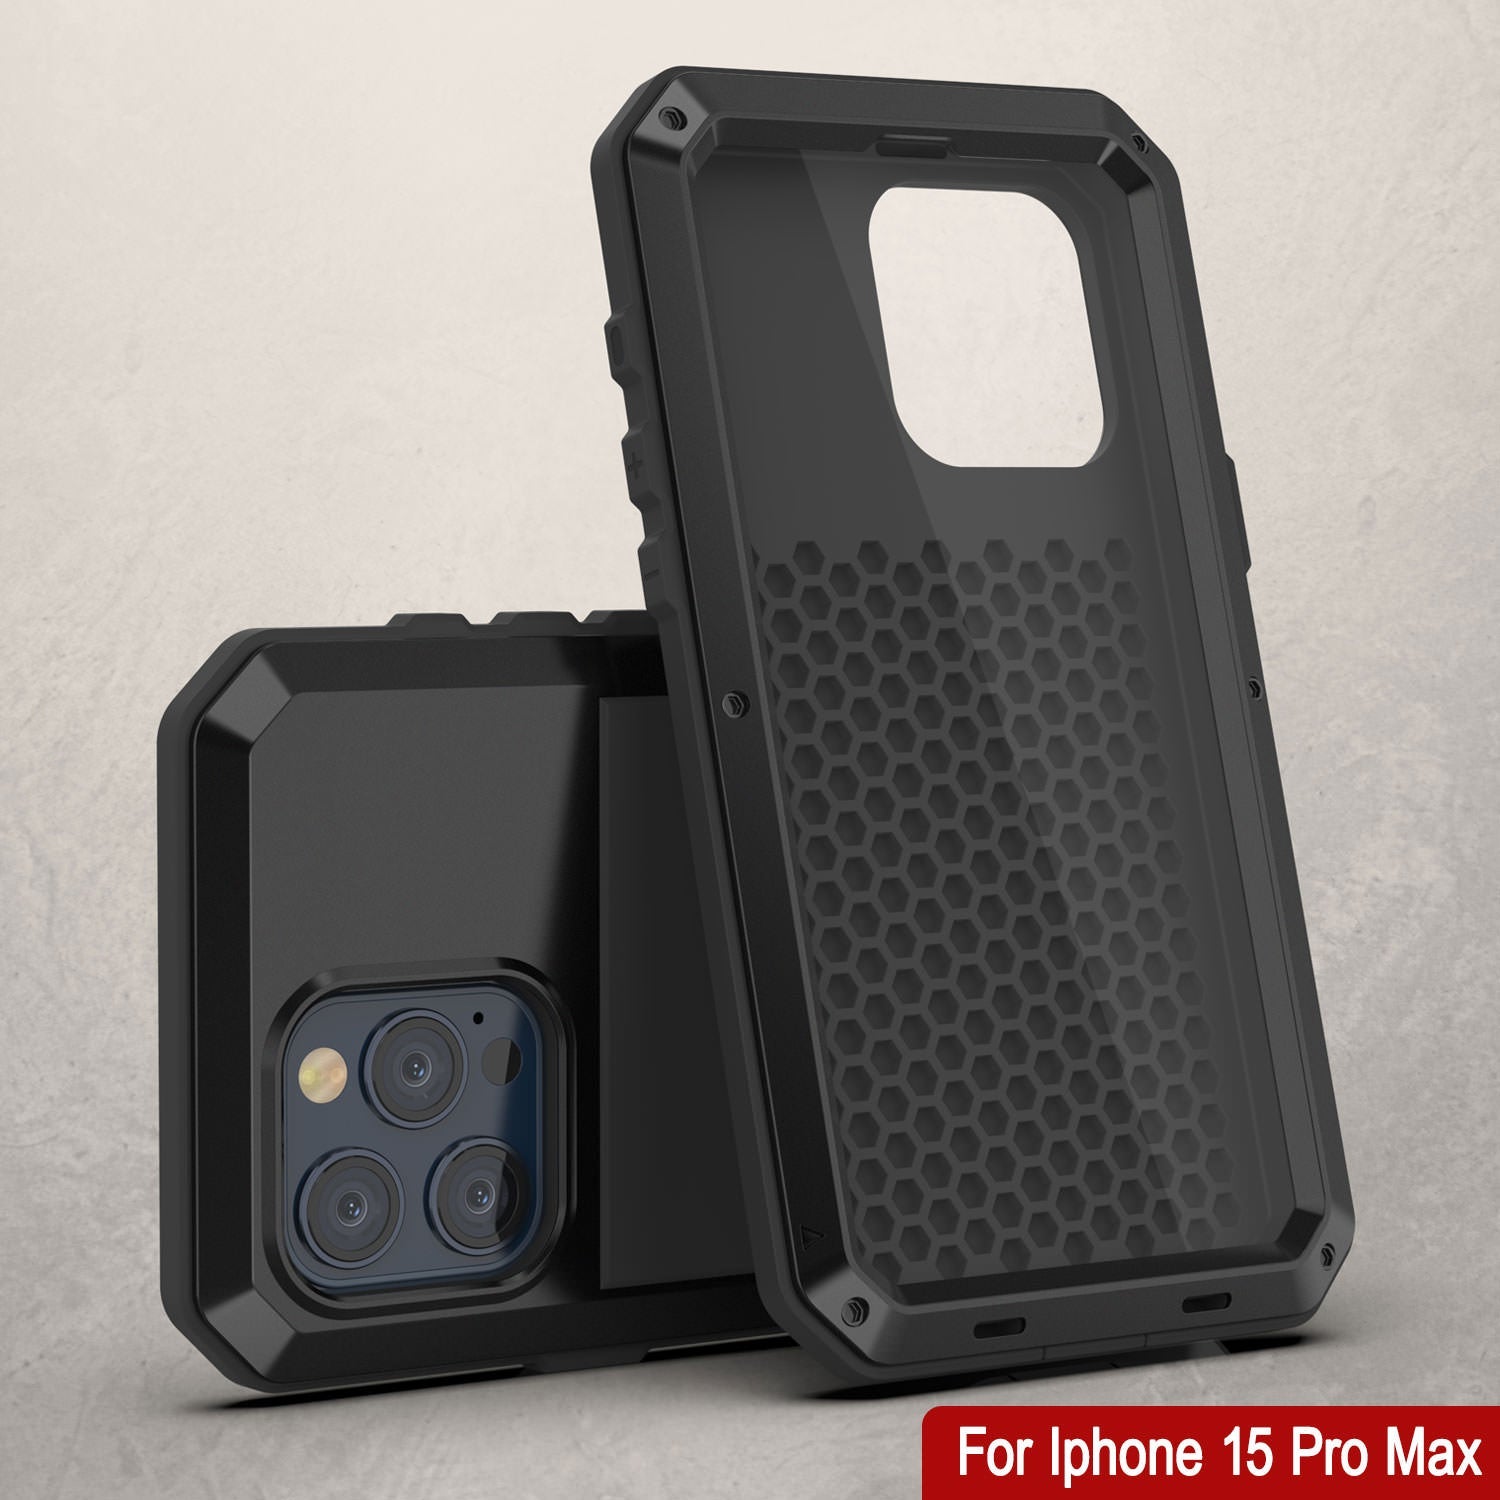 iPhone 15 Pro Max Metal Case, Heavy Duty Military Grade Armor Cover [shock proof] Full Body Hard [Black]